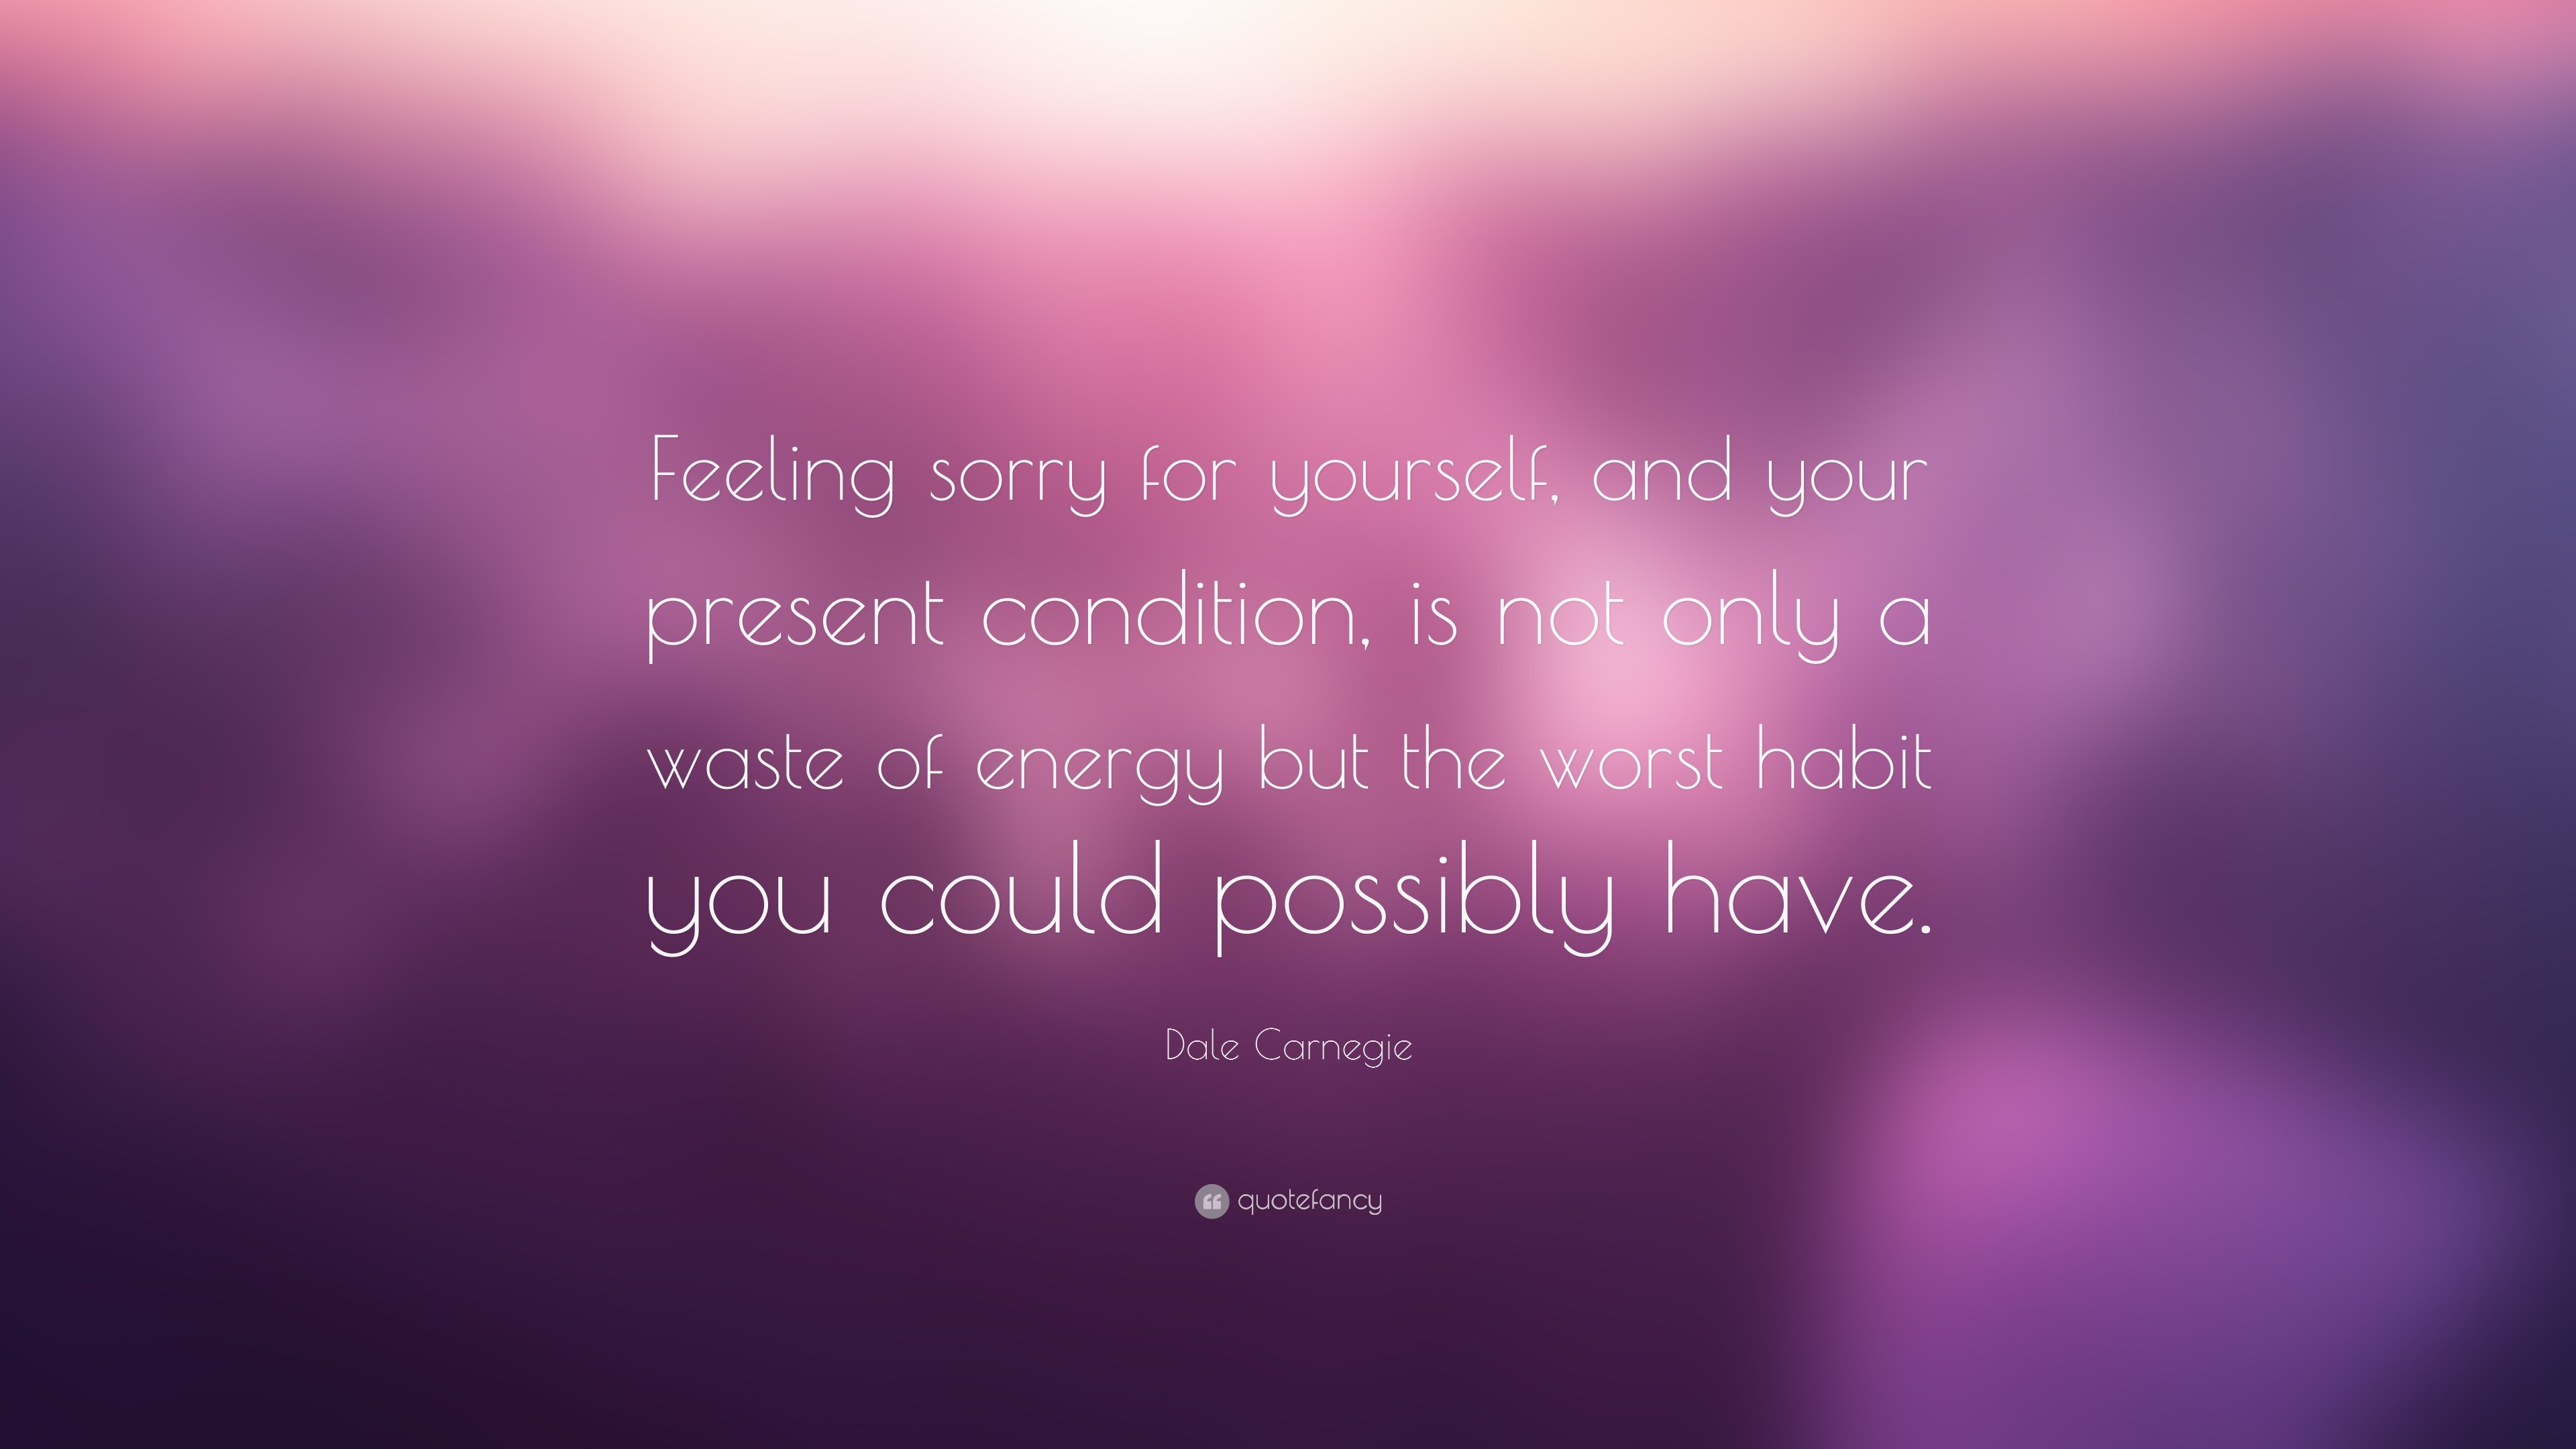 Dale Carnegie Quote: “Feeling sorry for yourself, and your present ...